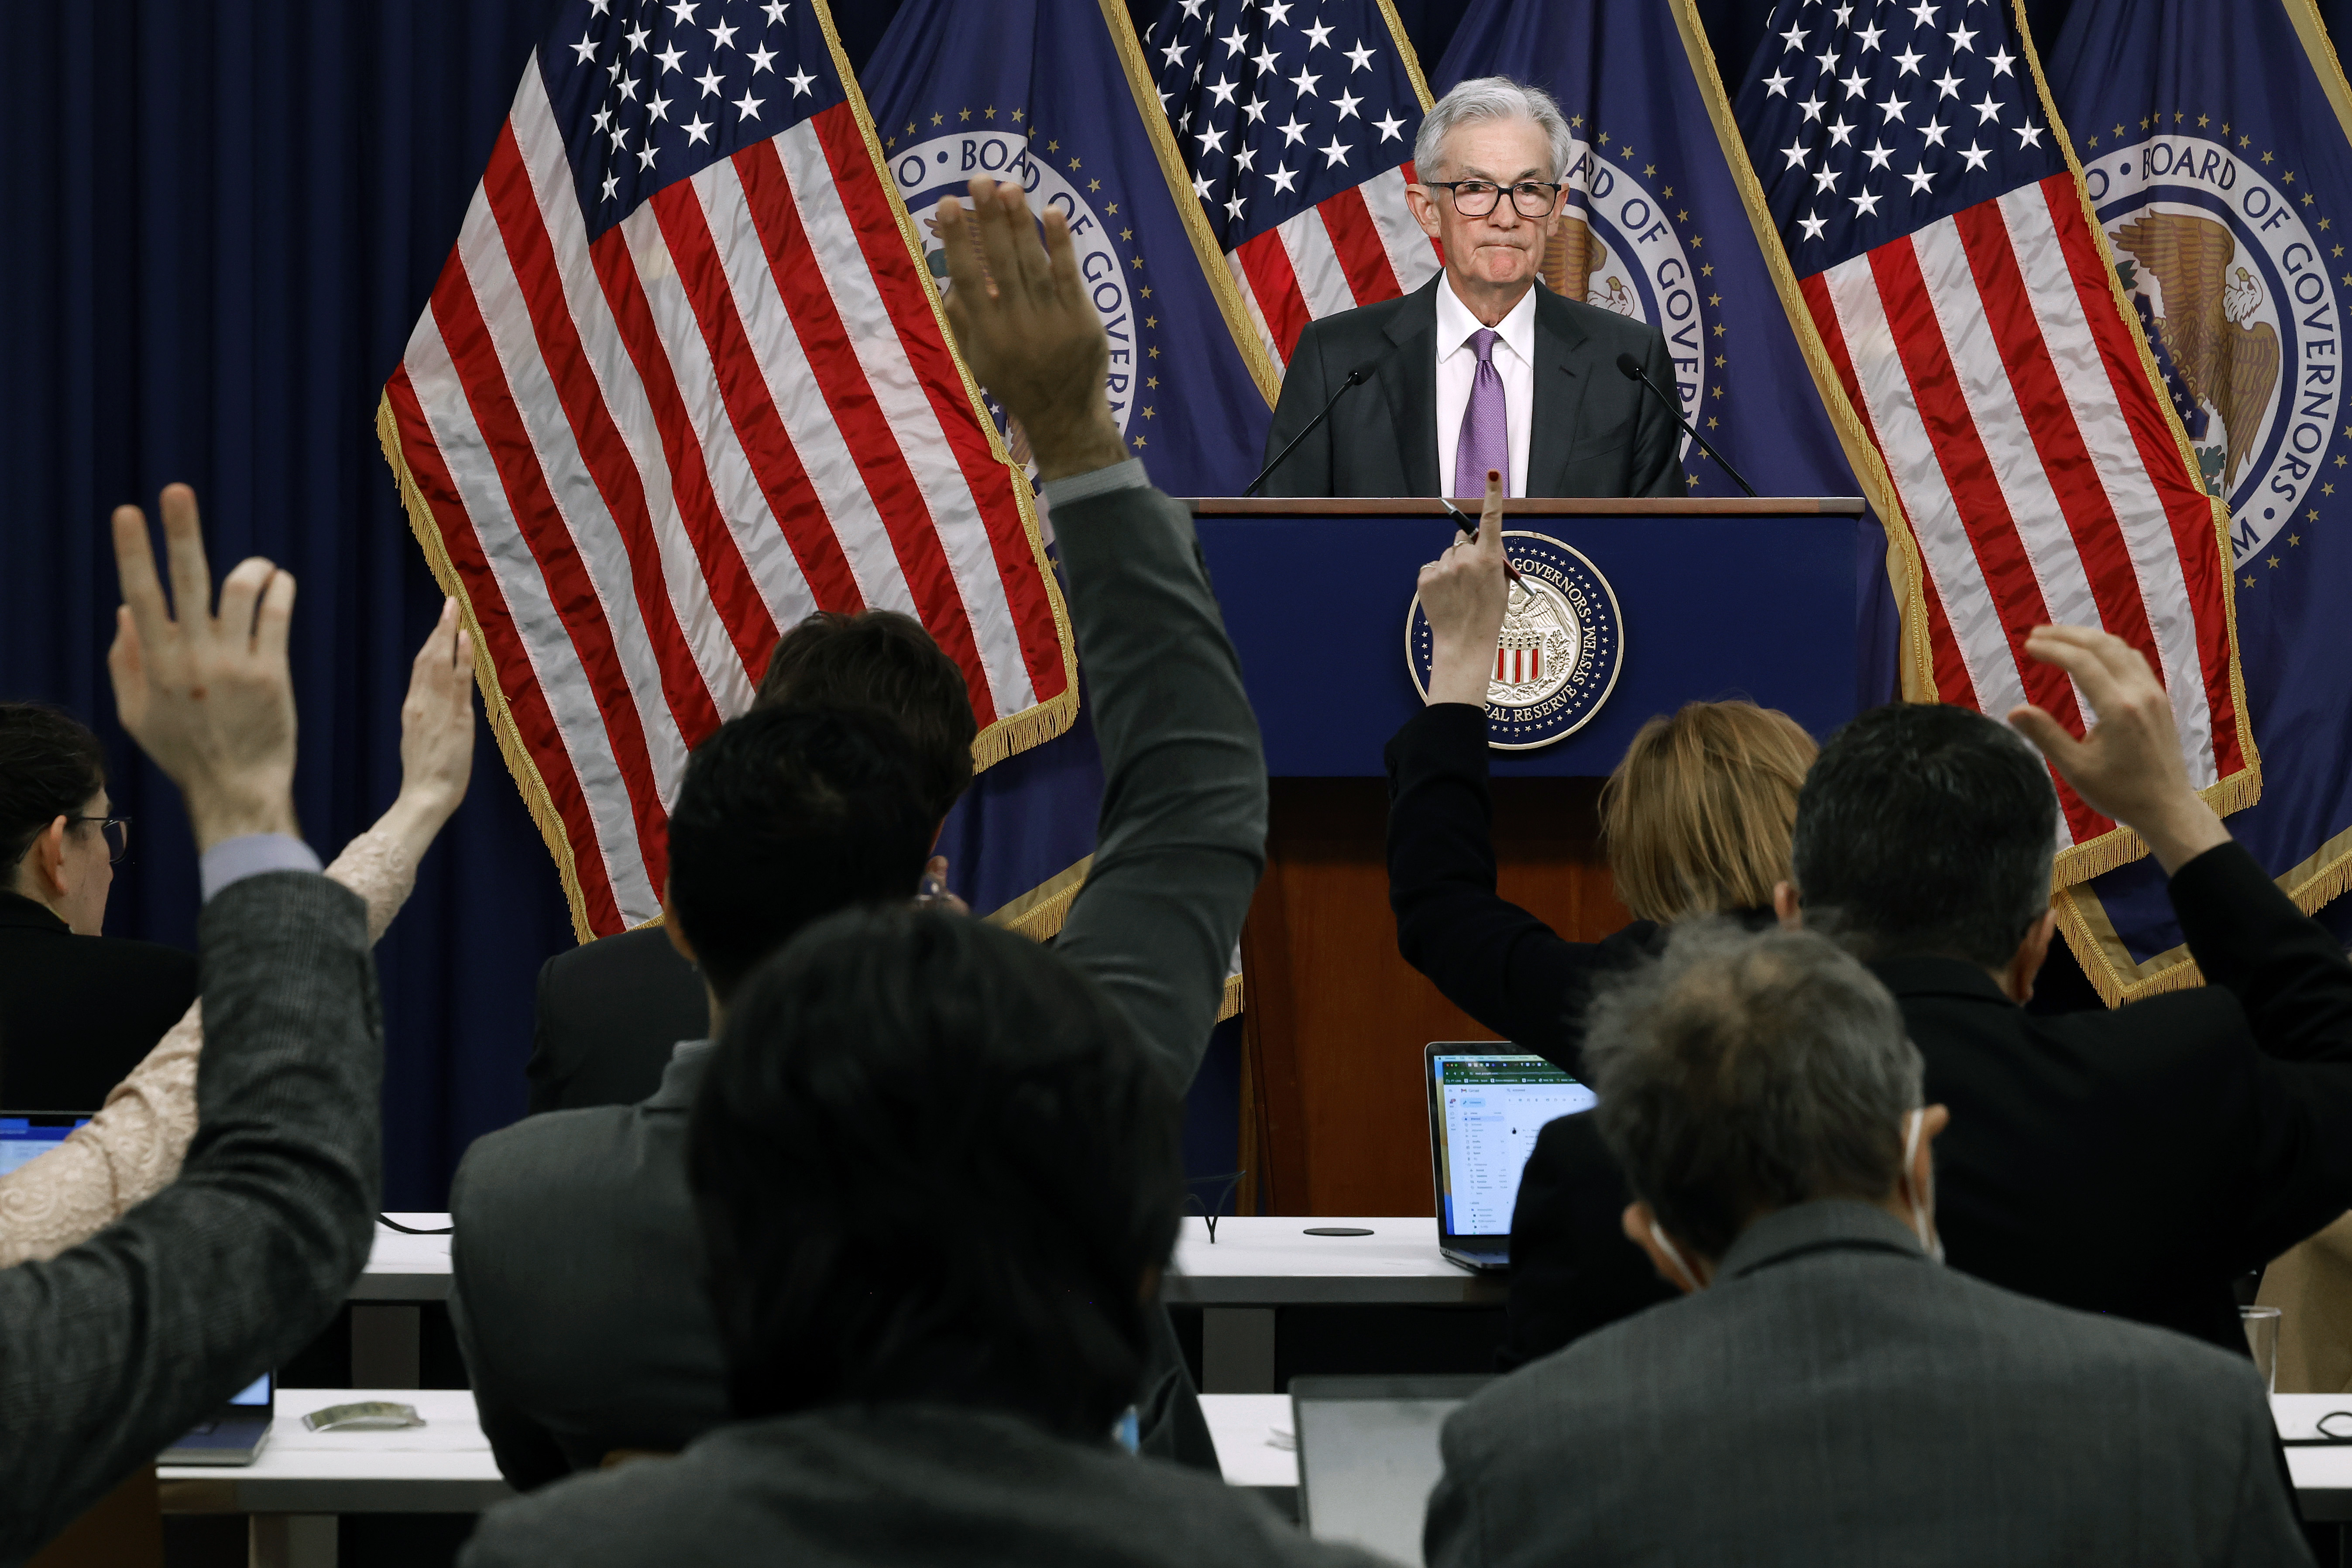 Reporters raise their hands to ask Federal Reserve Chair Jerome Powell questions during a news conference in Washington, DC, on March 20.